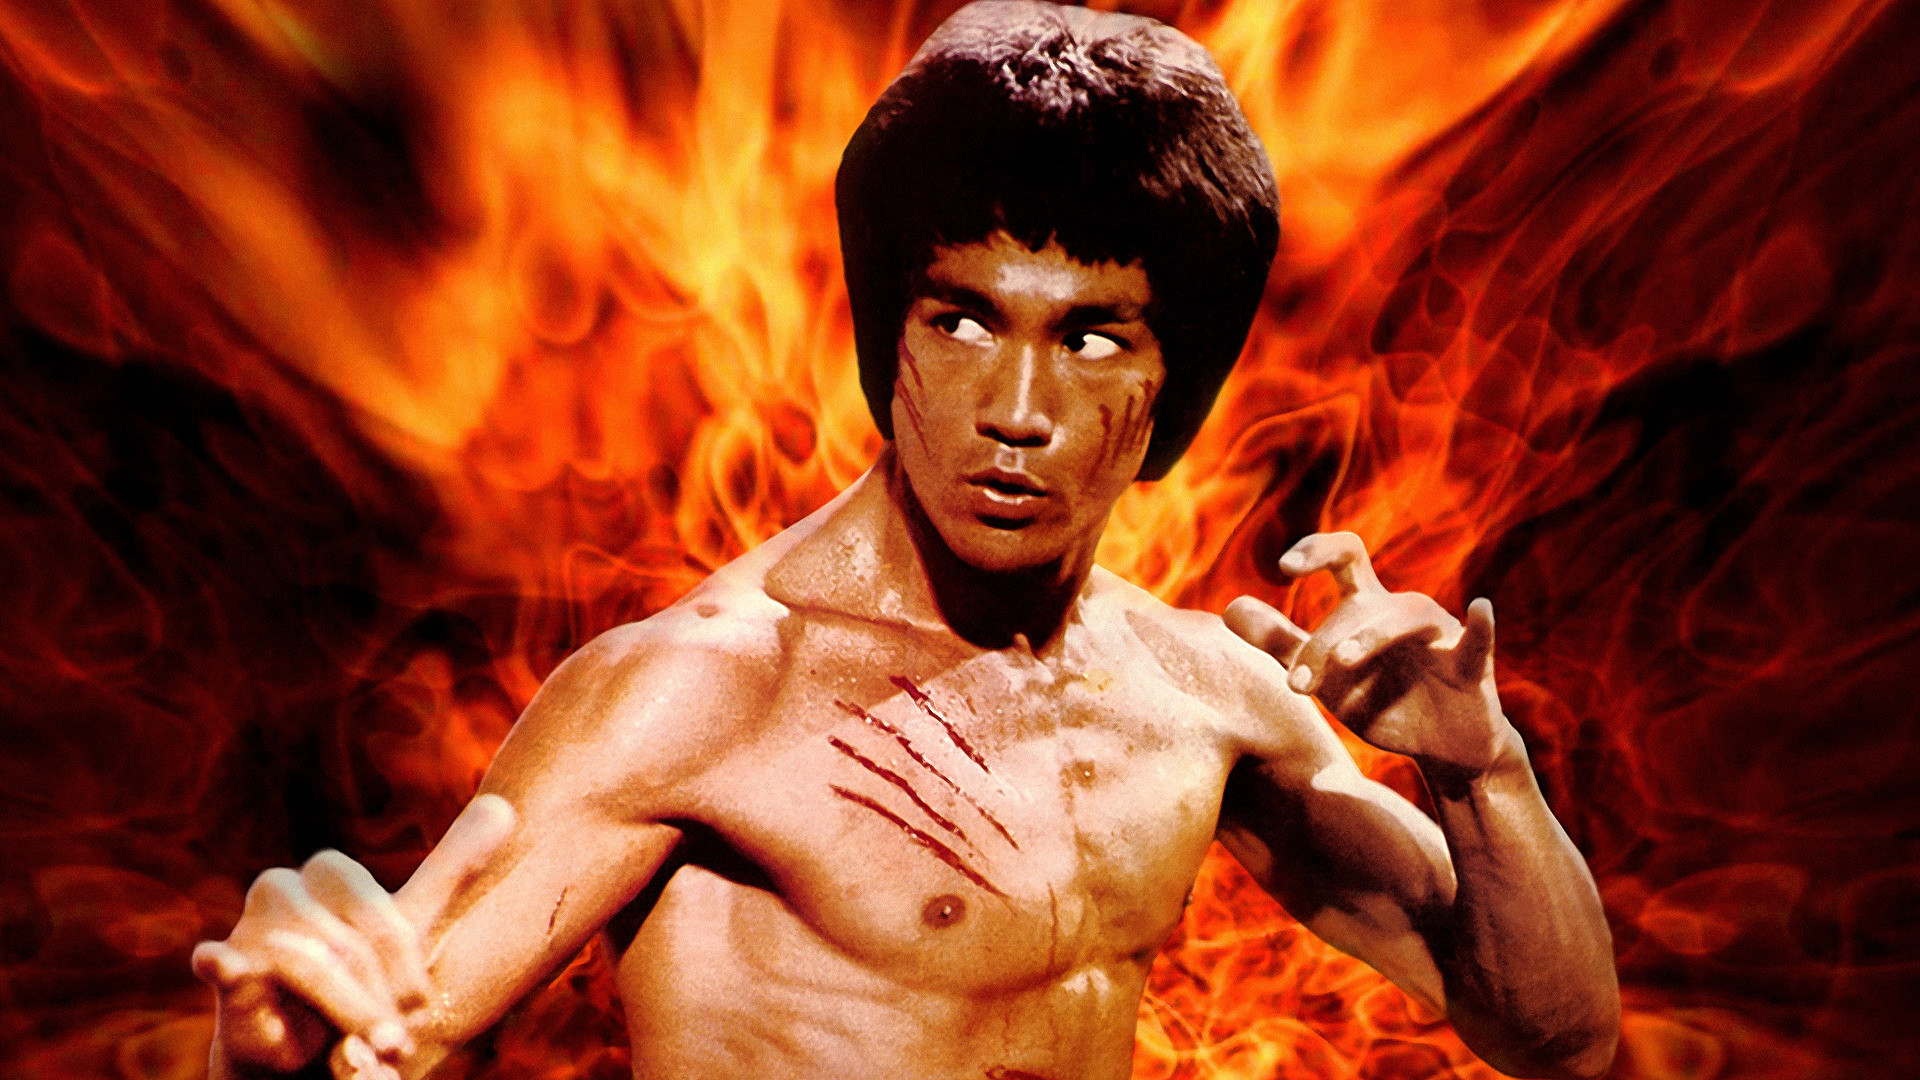 Bruce Lee wallpapers for desktop, download free Bruce Lee pictures and  backgrounds for PC 